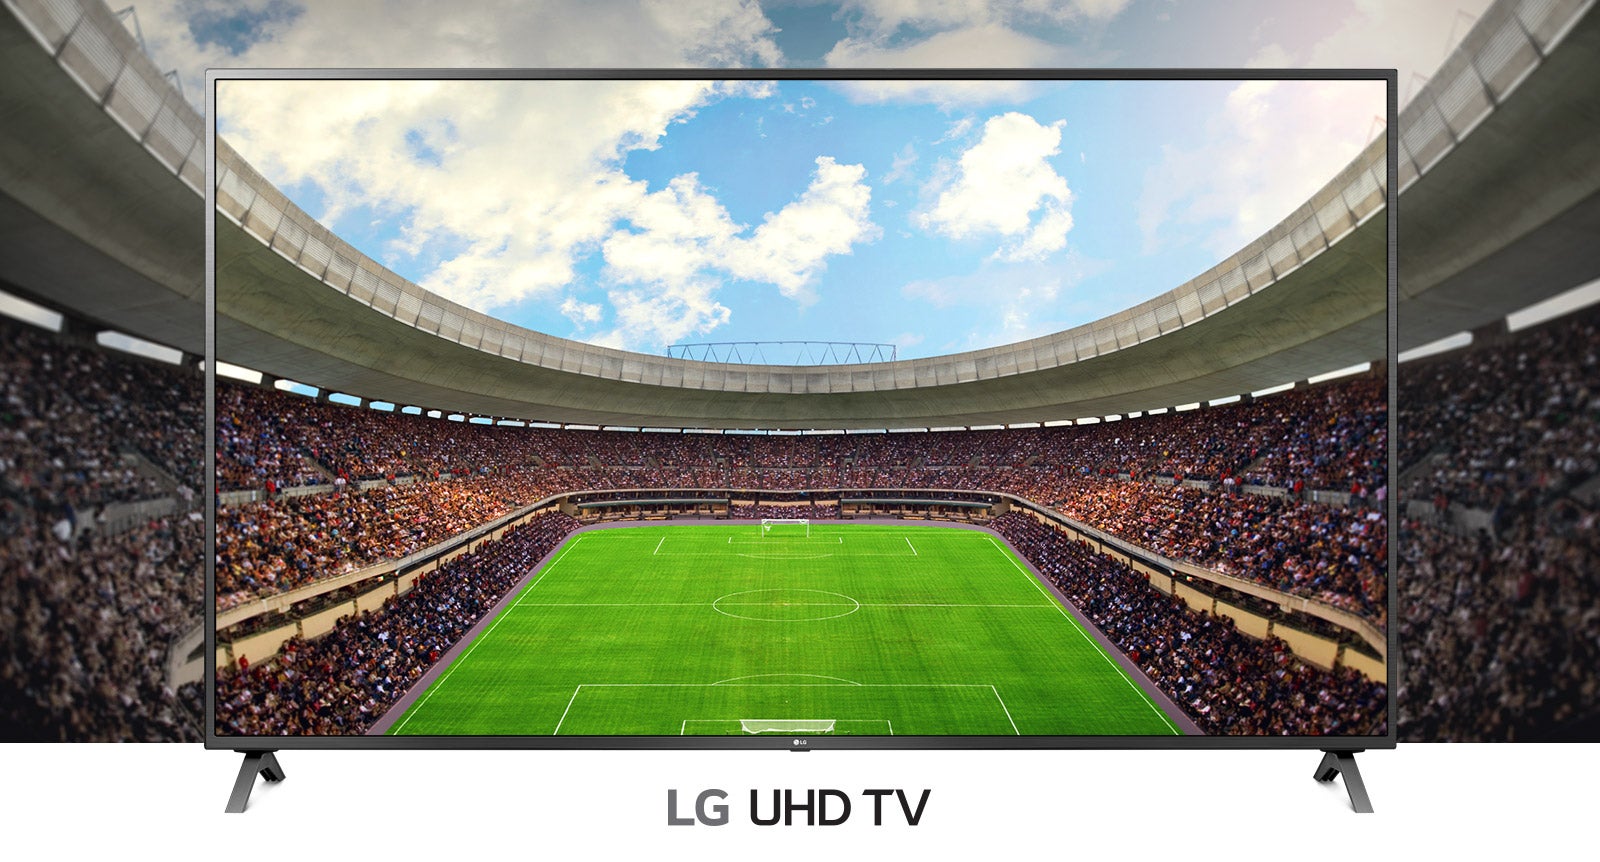 See Clear Views With An Lg Uhd Tv